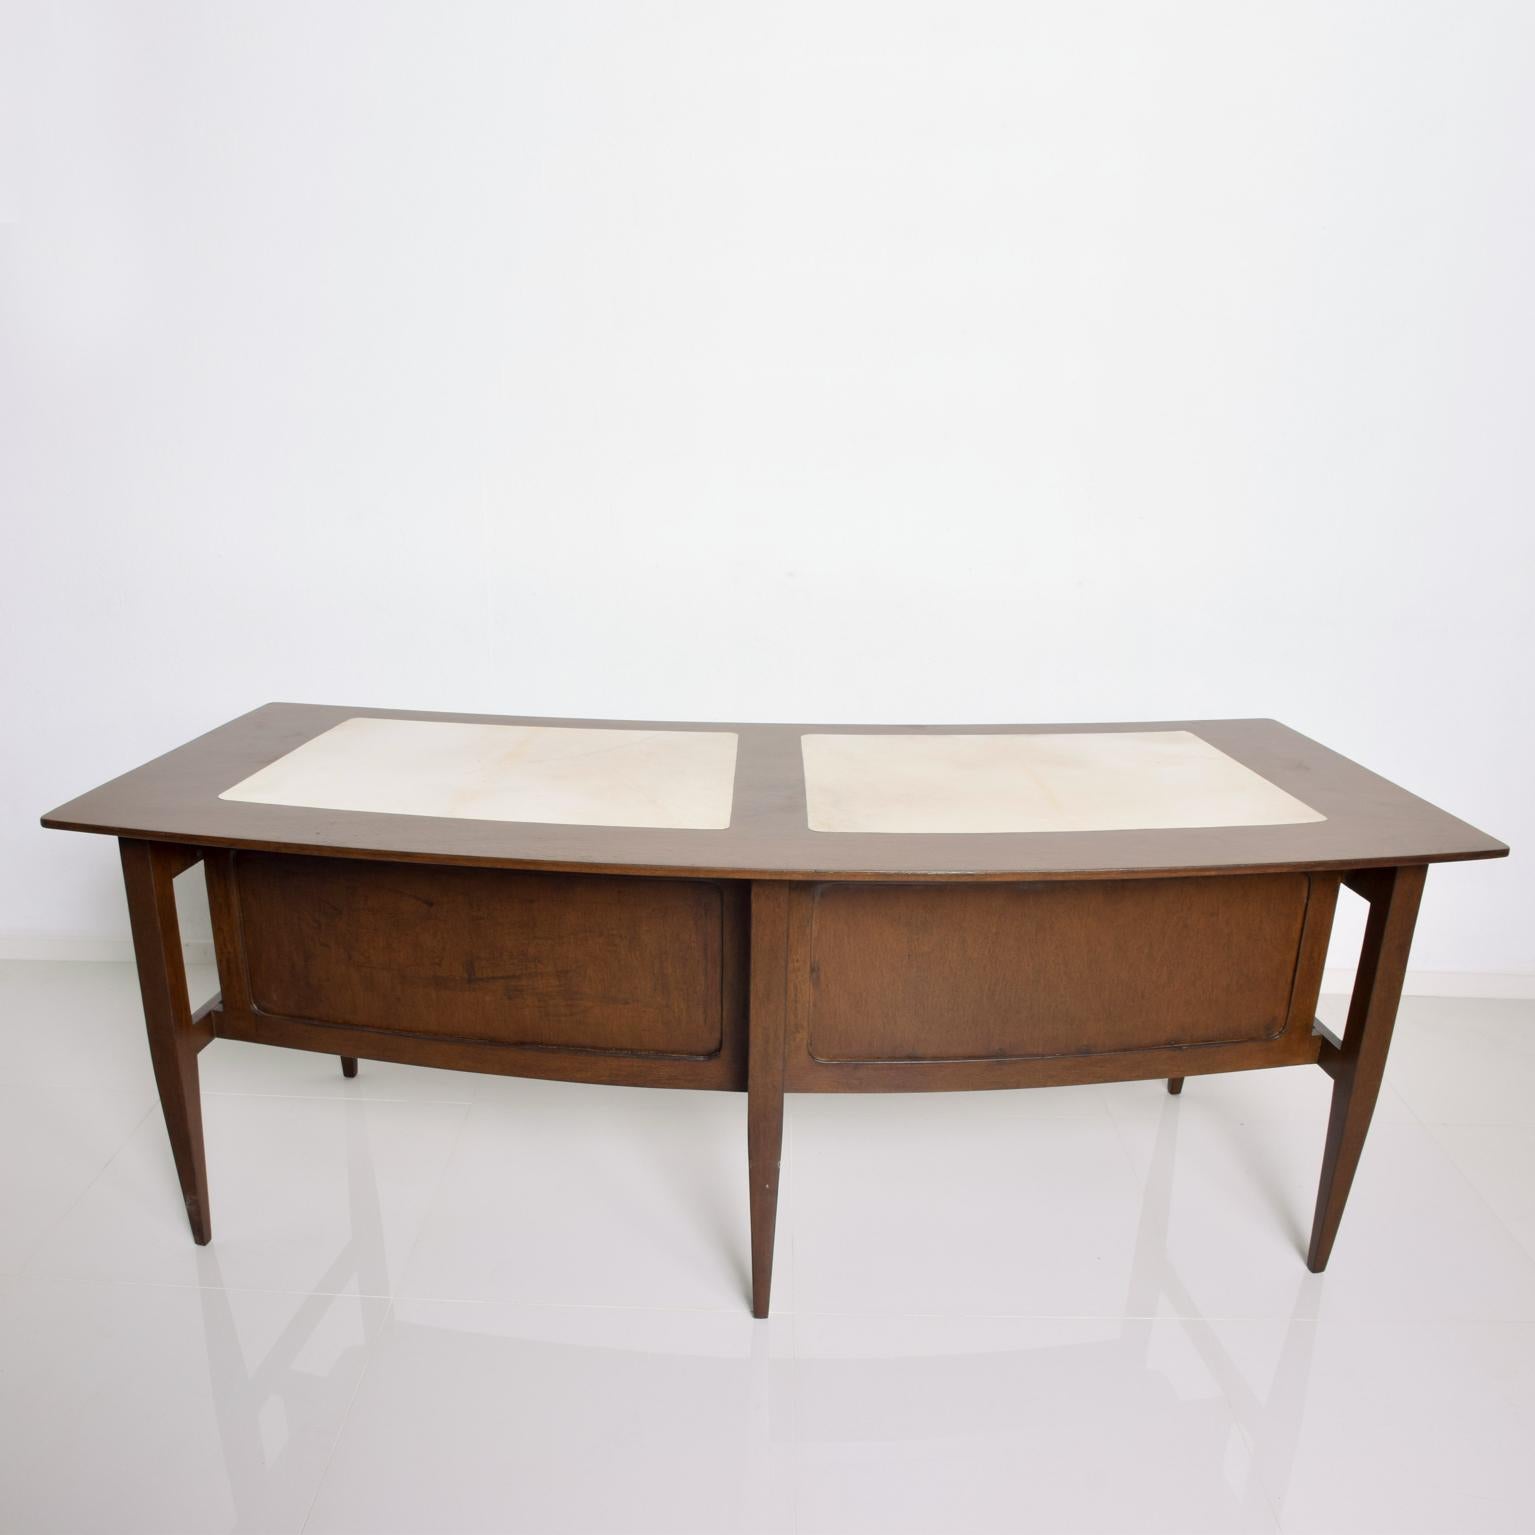 AMBIANIC is pleased to offer:
Luxurious desk with a fabulous curved shape. Constructed in mahogany wood and goatskin.
No label or information present from the maker. Attribution design style of Arturo Pani.
Made in Mexico 1960s
Dimensions: 78 .25W x